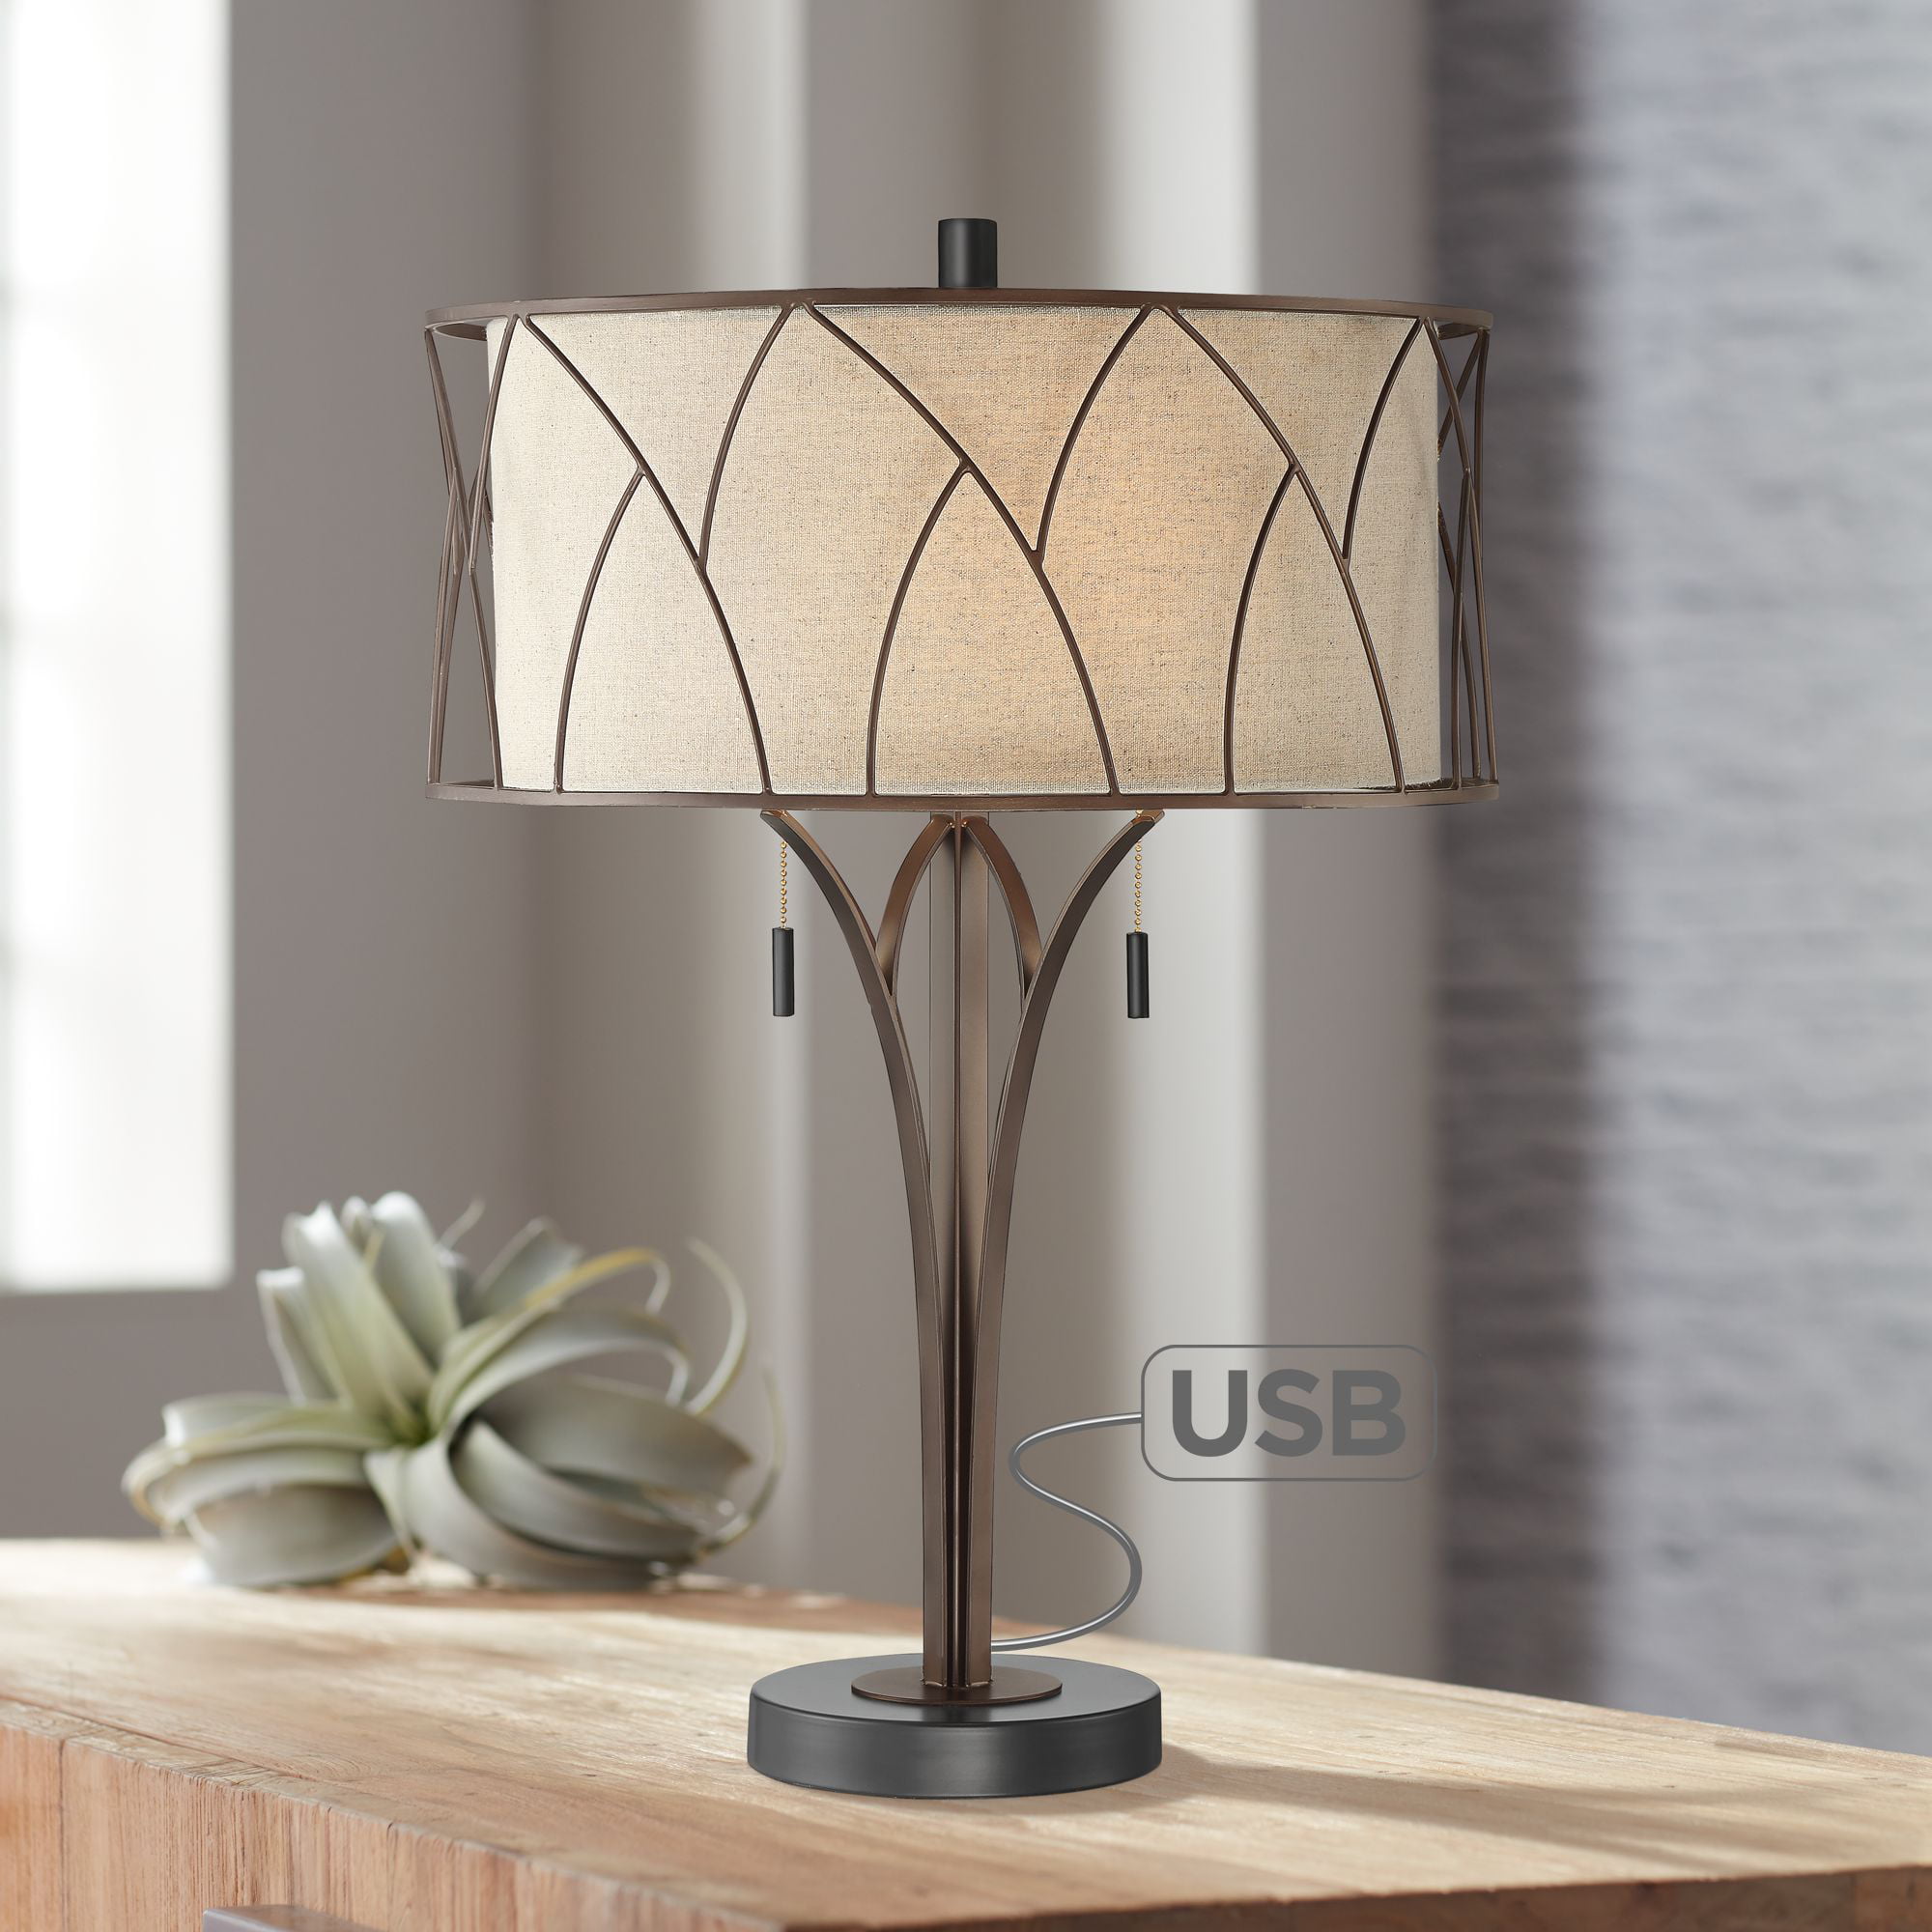 Franklin Iron Works Mid Century Modern, Franklin Iron Works Industrial Table Lamp With Usb Port Ikea